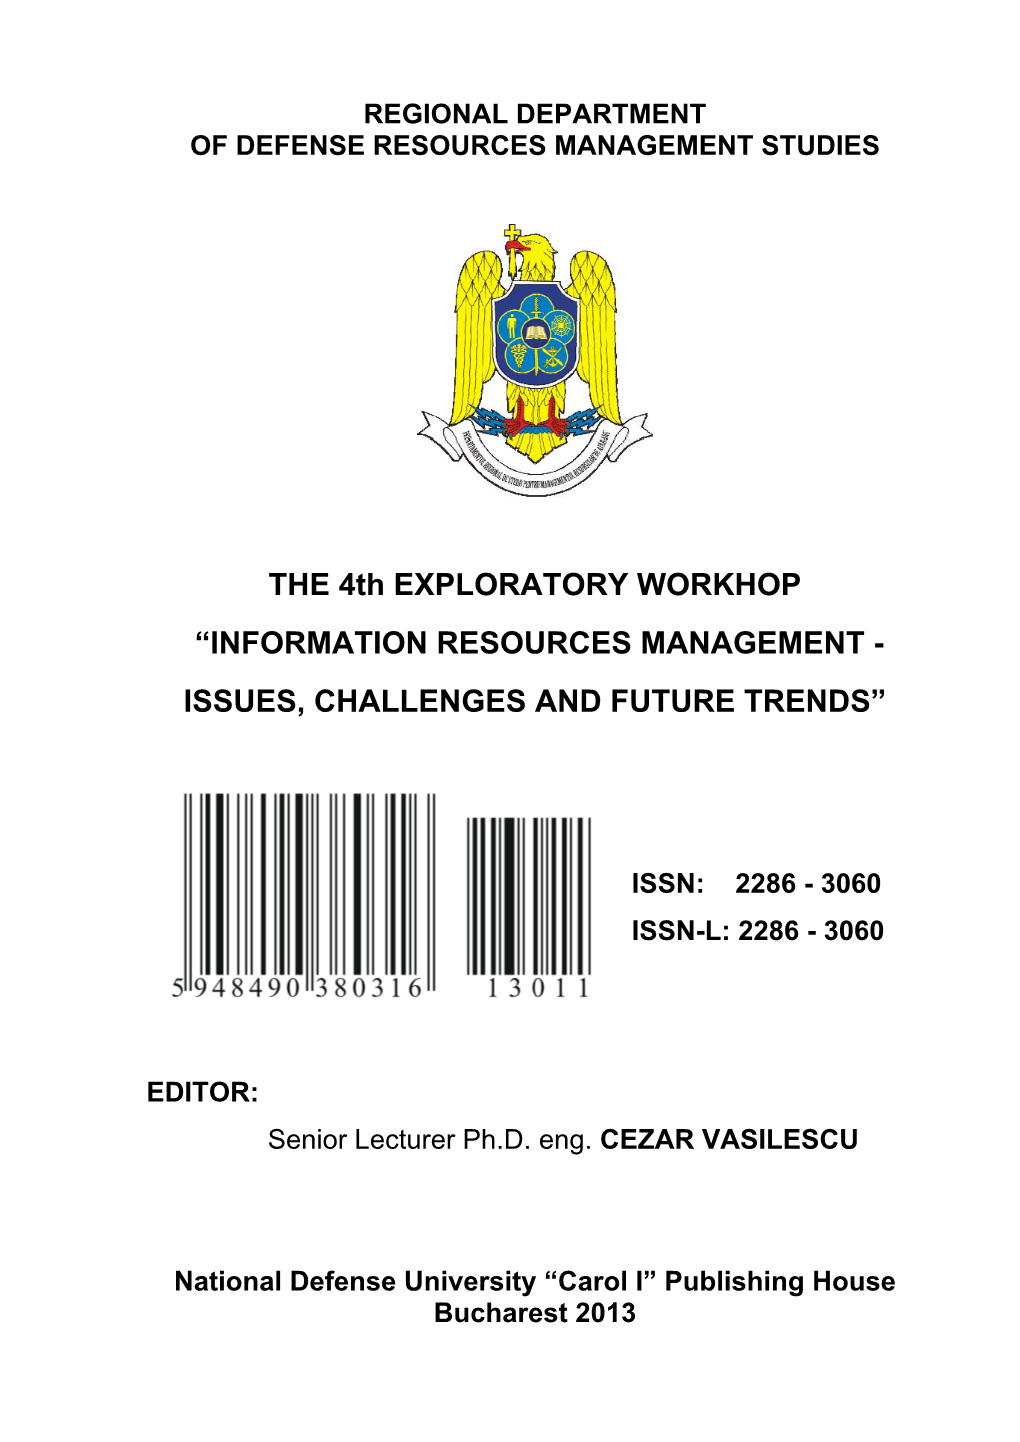 THE 4Th EXPLORATORY WORKHOP “INFORMATION RESOURCES MANAGEMENT - ISSUES, CHALLENGES and FUTURE TRENDS”